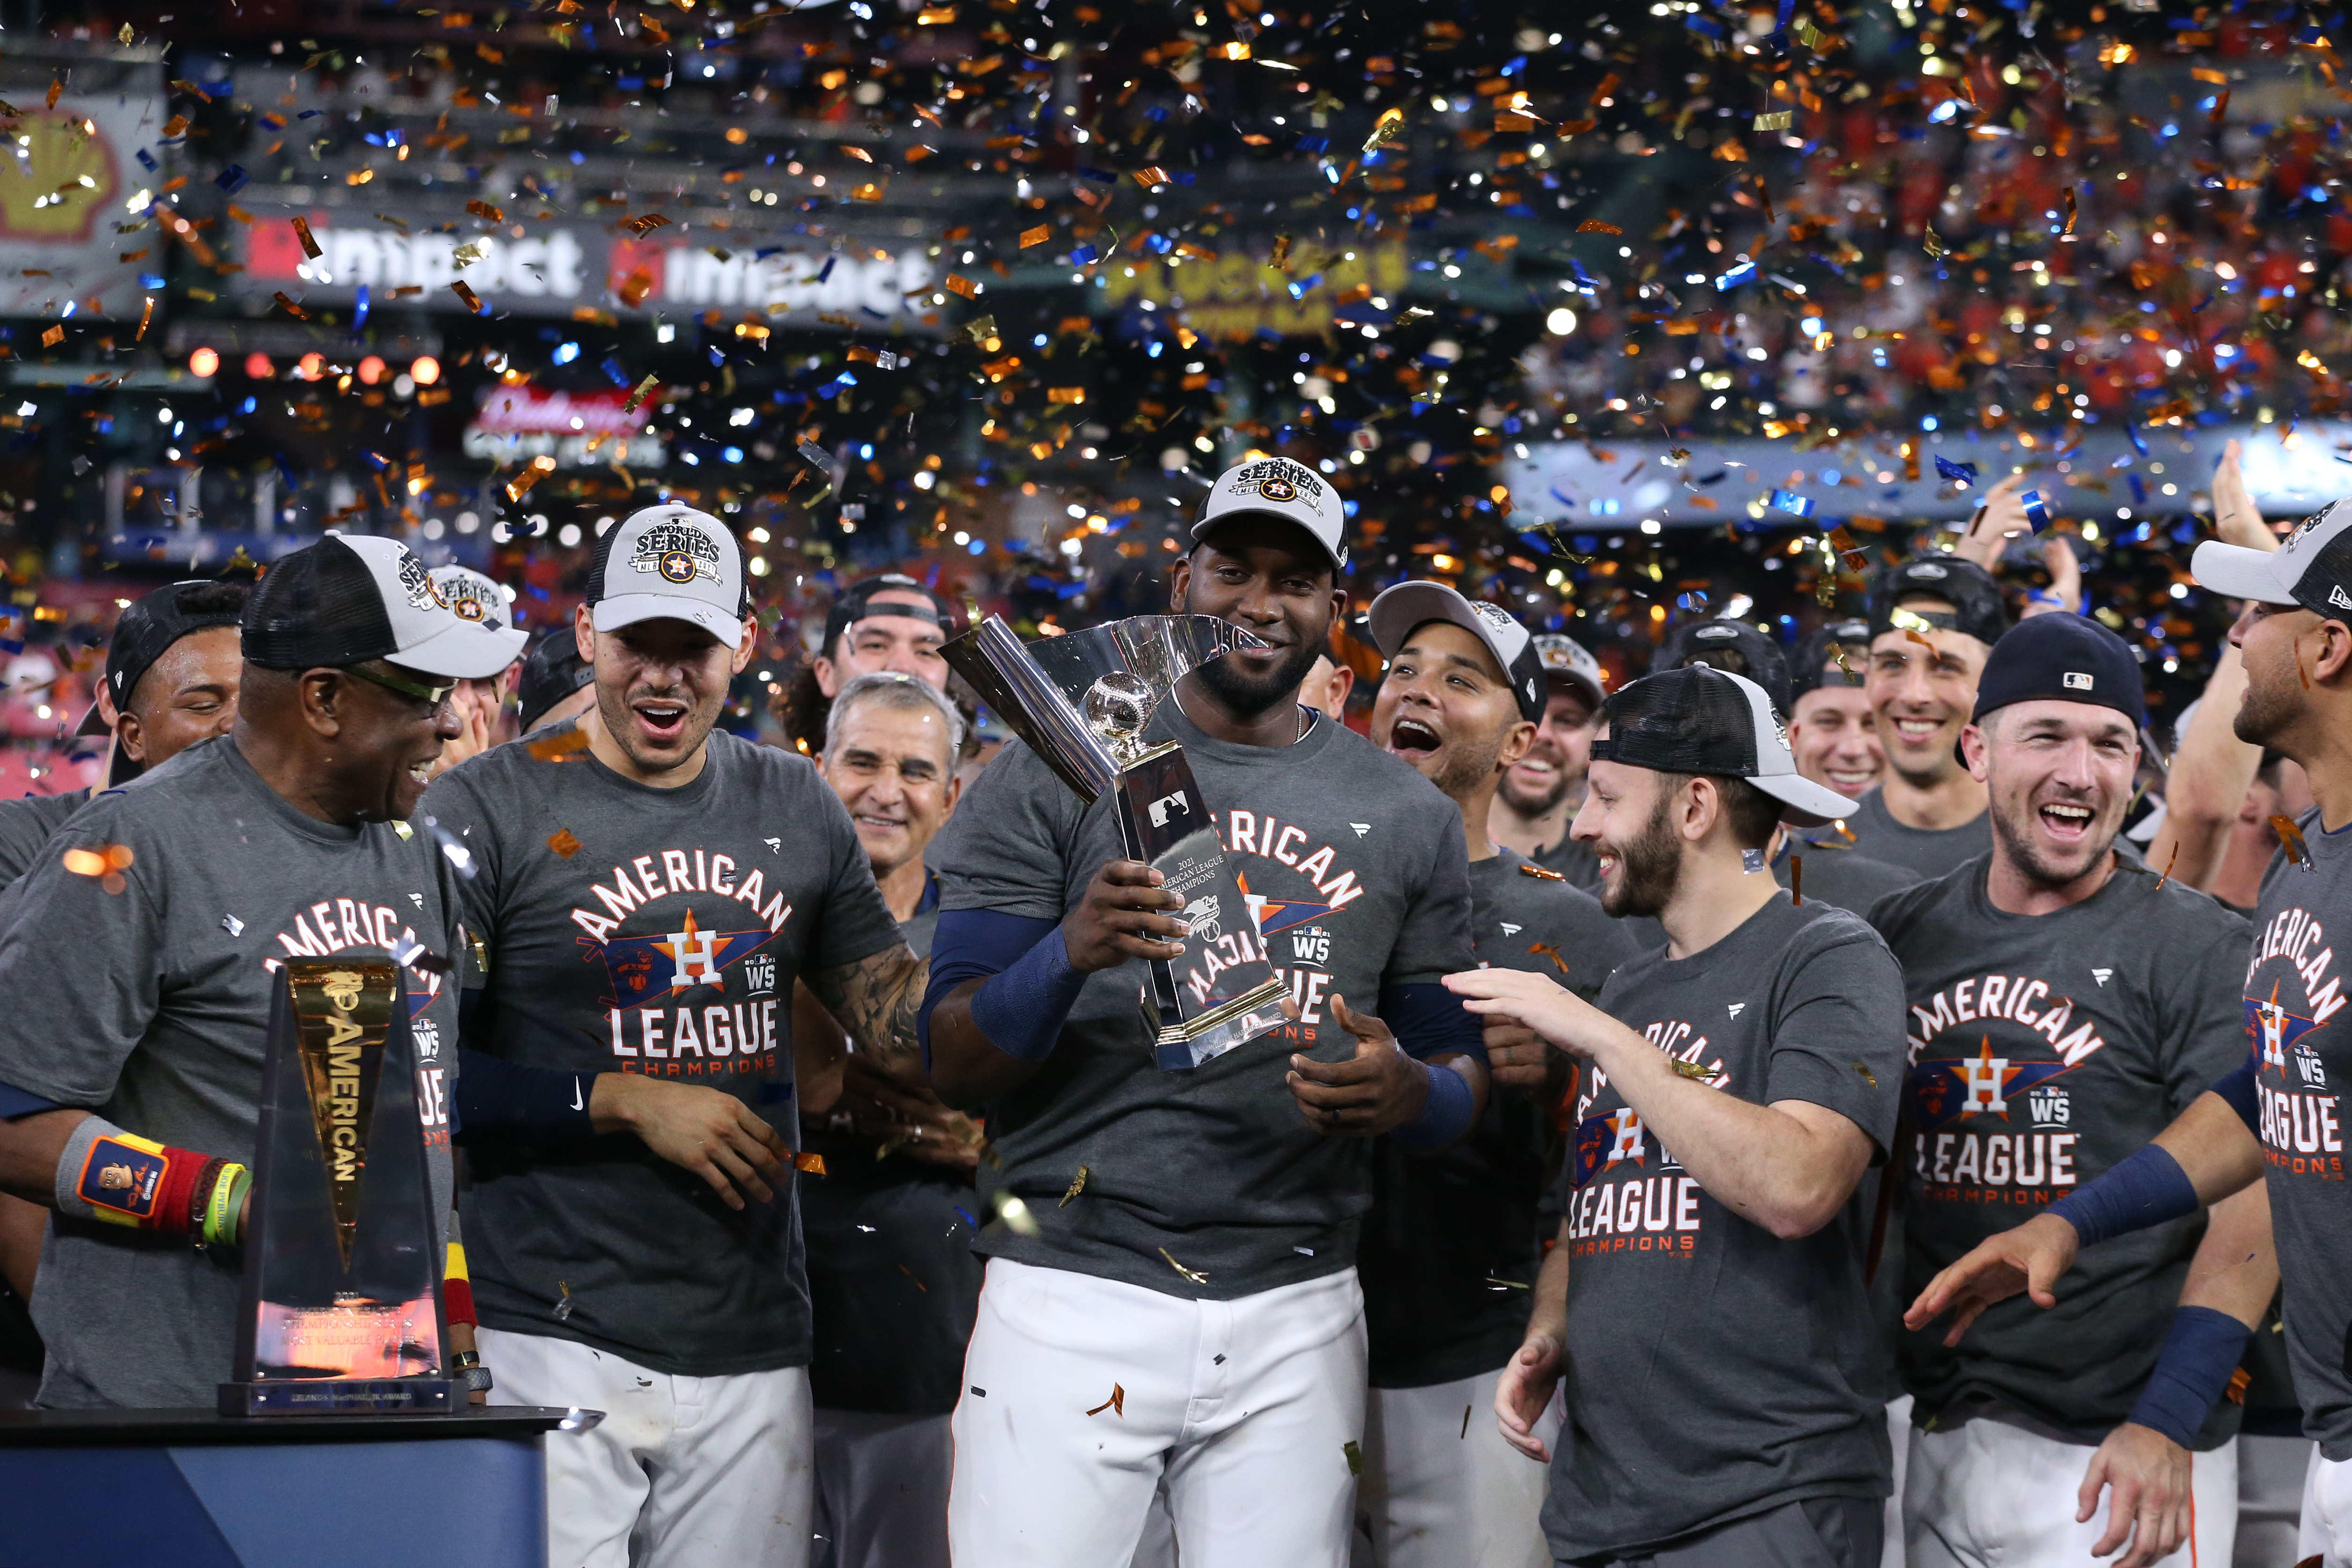 2022 Texas Rangers World Series, win total, pennant and division odds